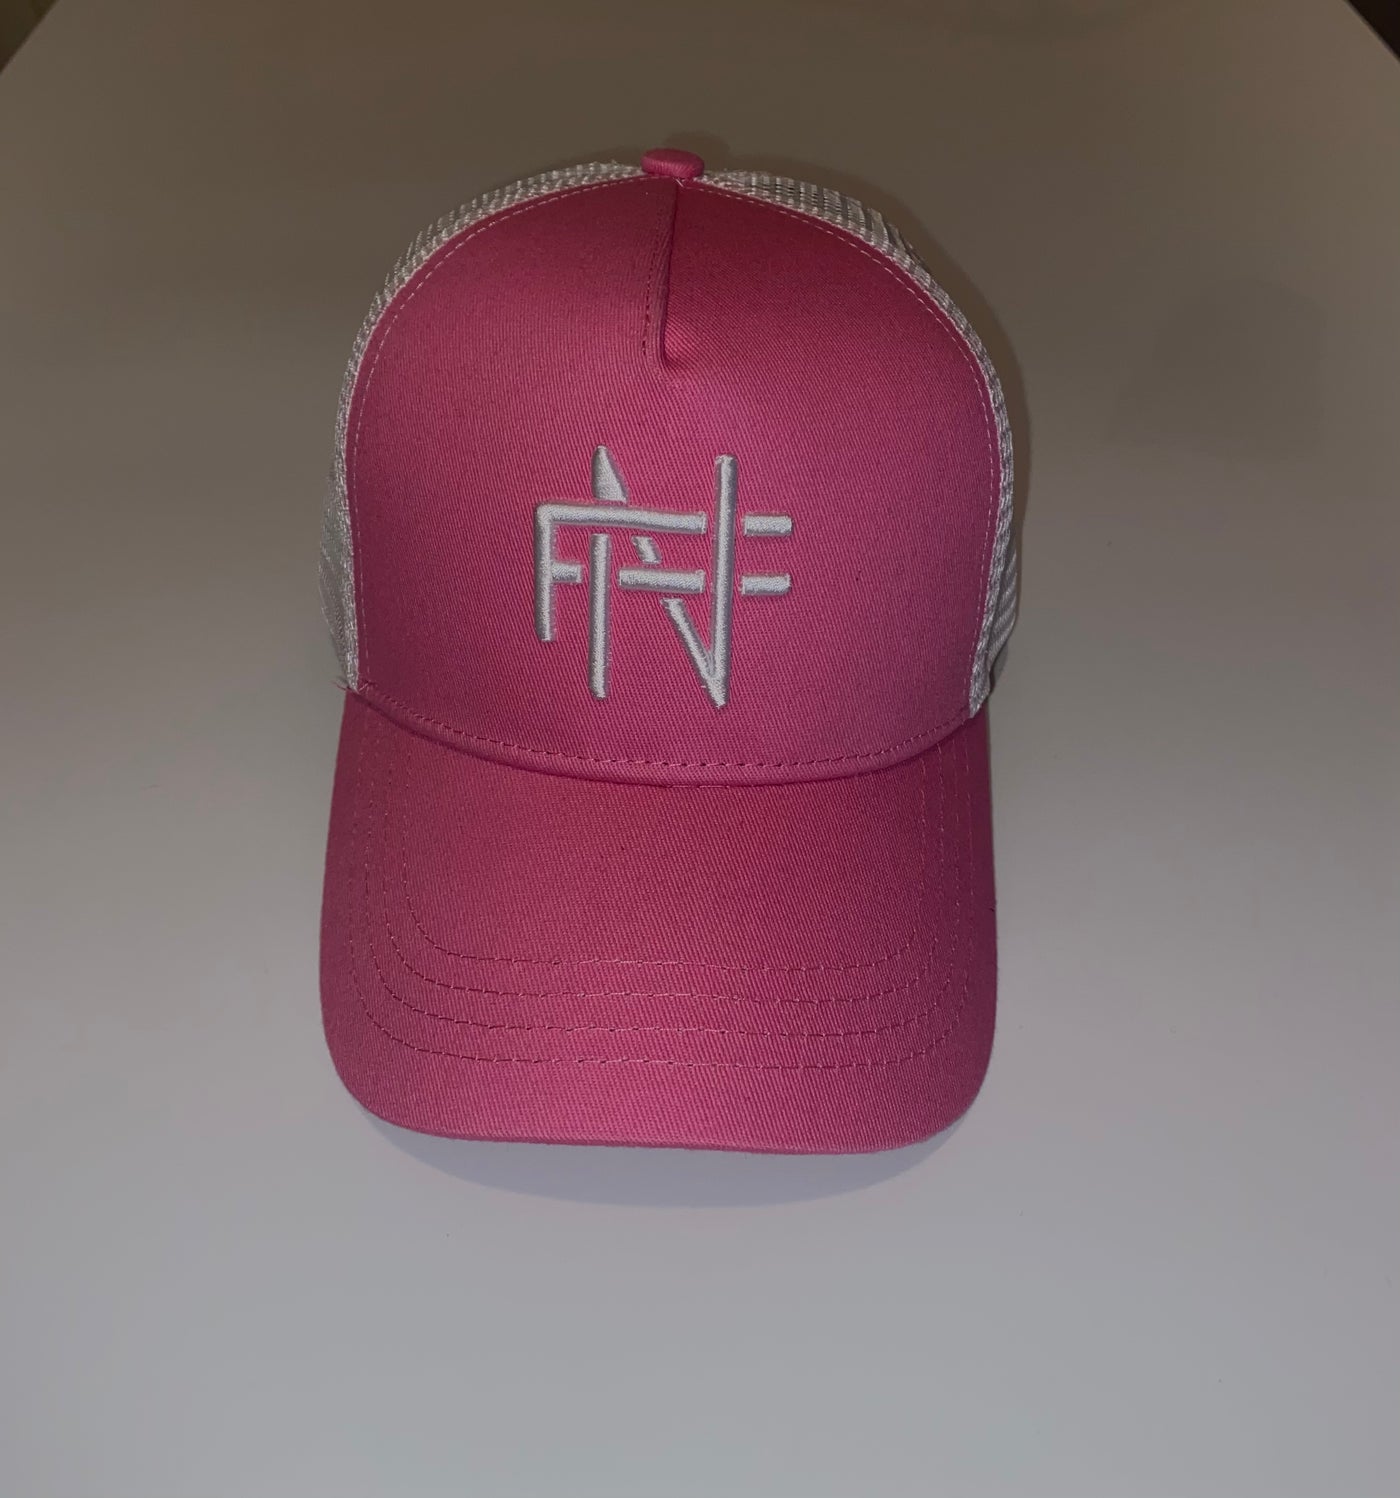 nike tech tracksuit | FN Cap Pink & White | Fashionable Baseball Cap for a Playful Look